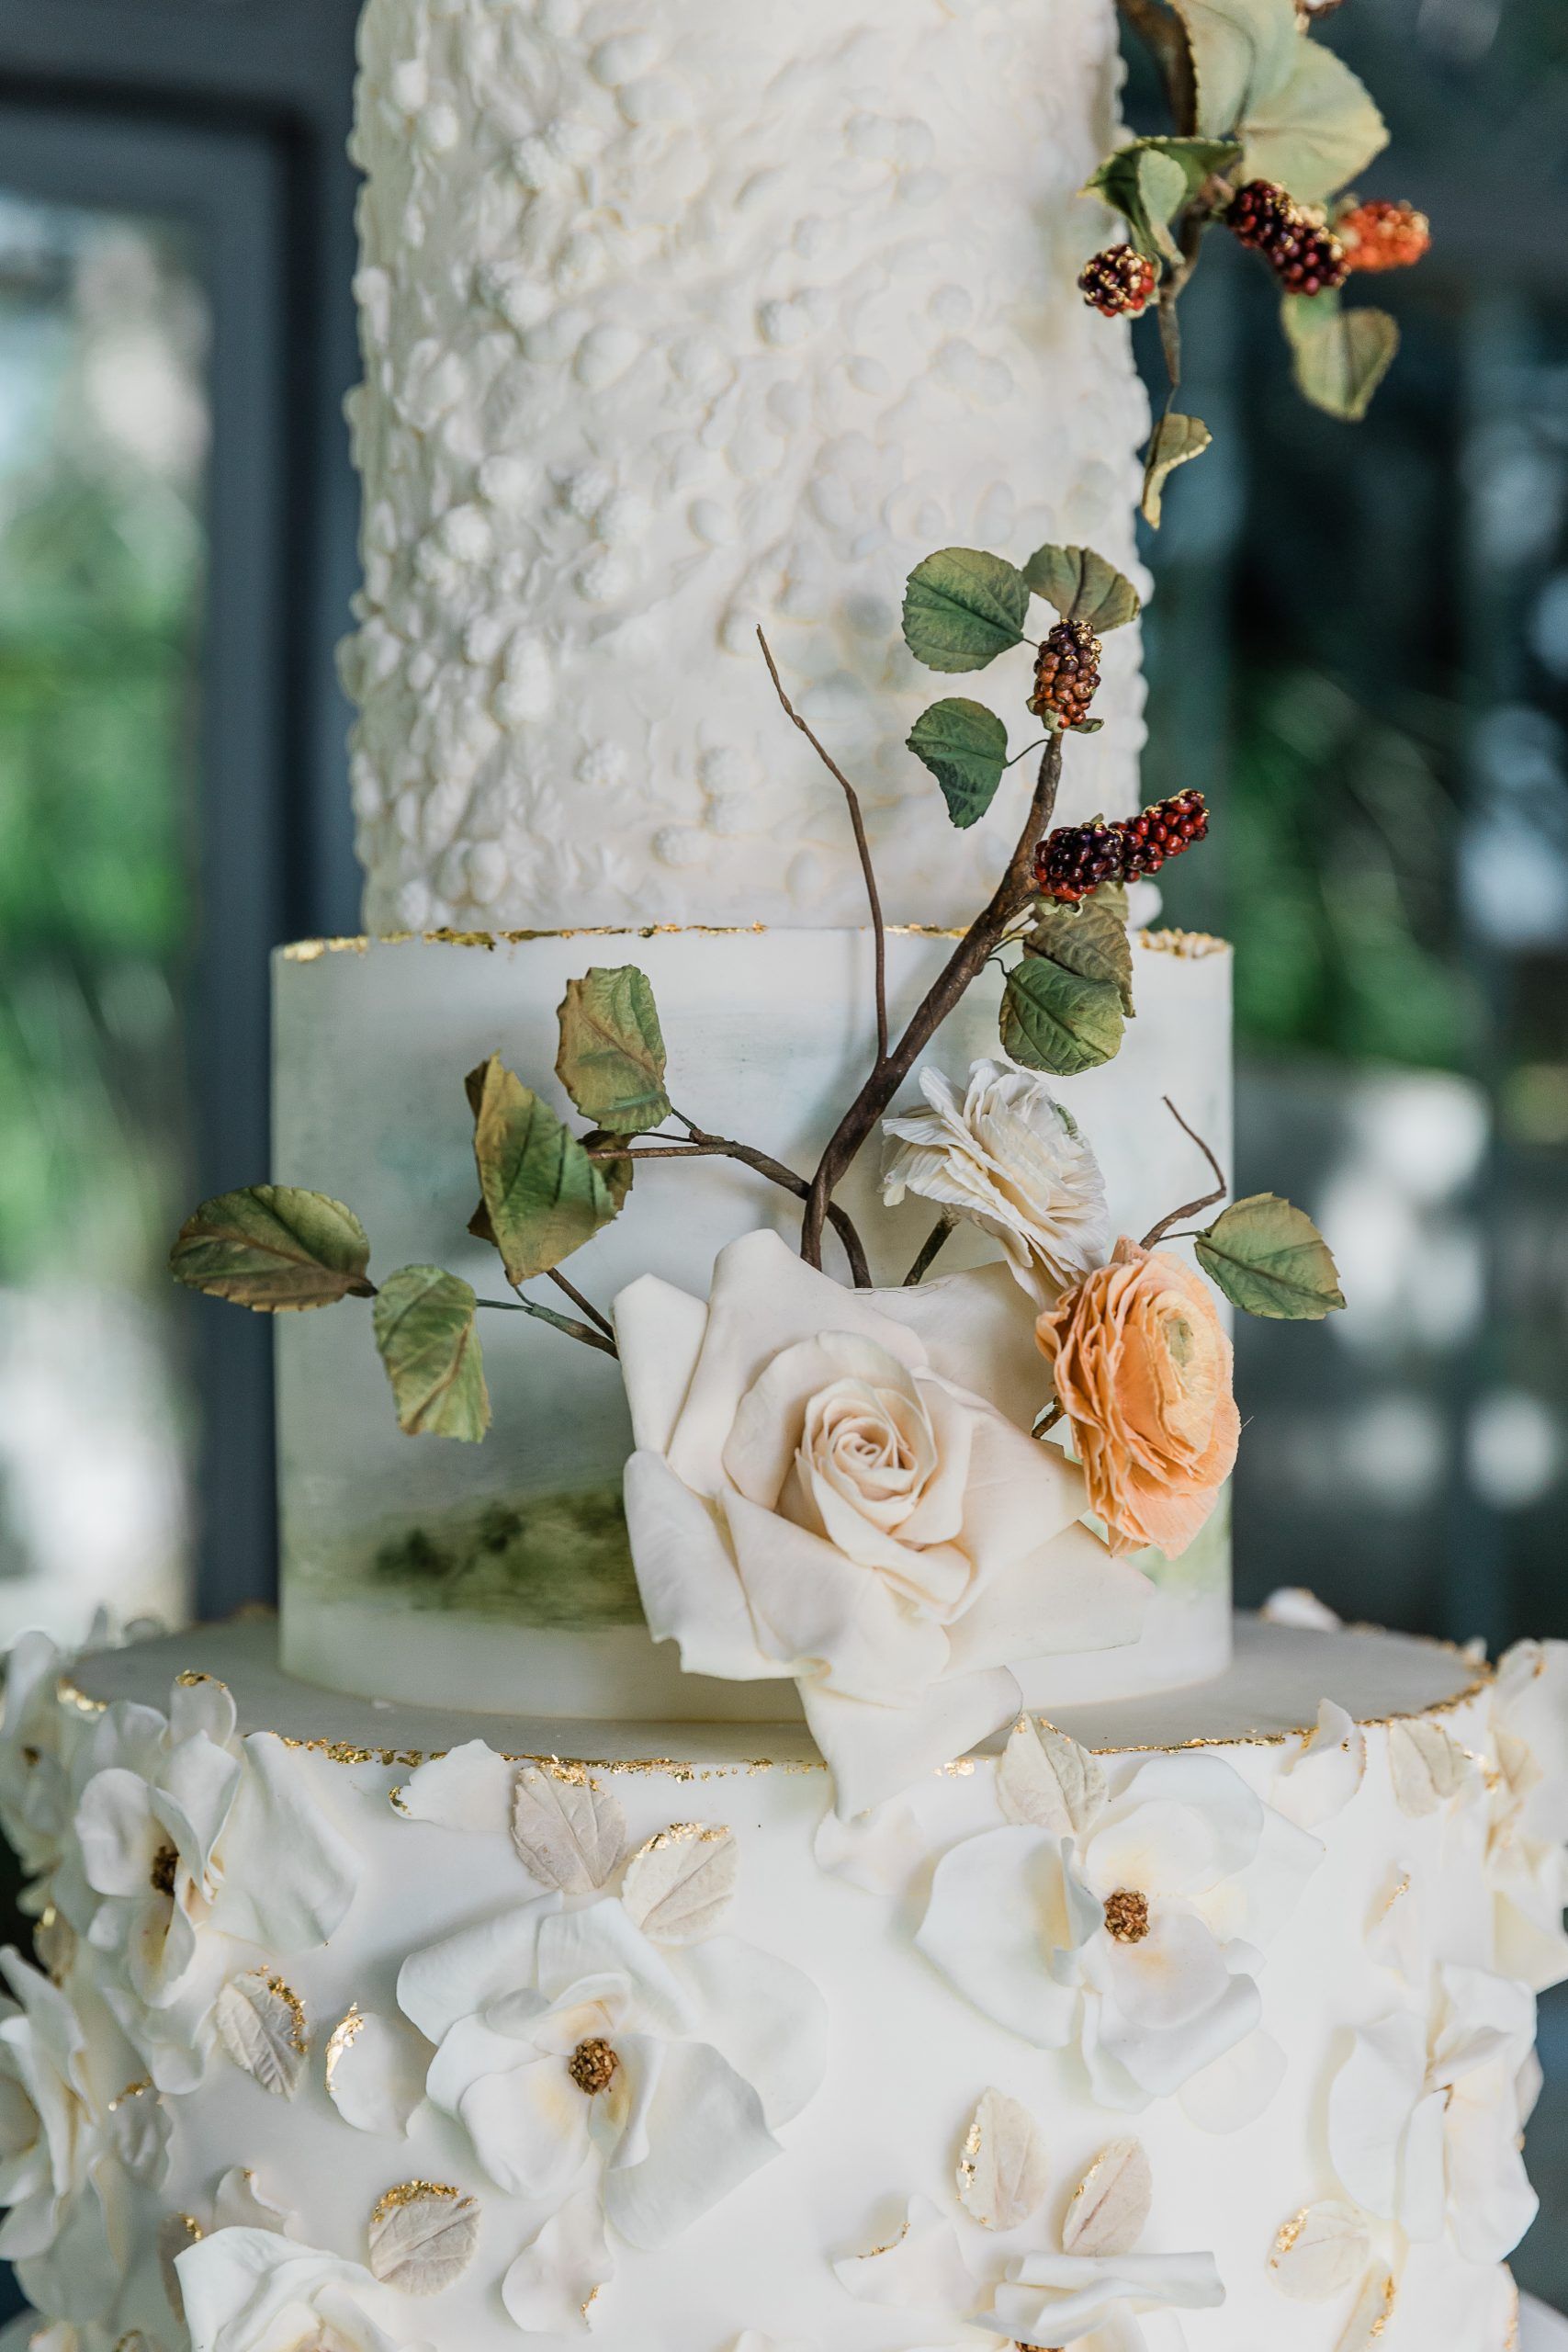 Kelly Gray Wedding Cakes Inspired By Claire Pettibone Les Fleurs Collection